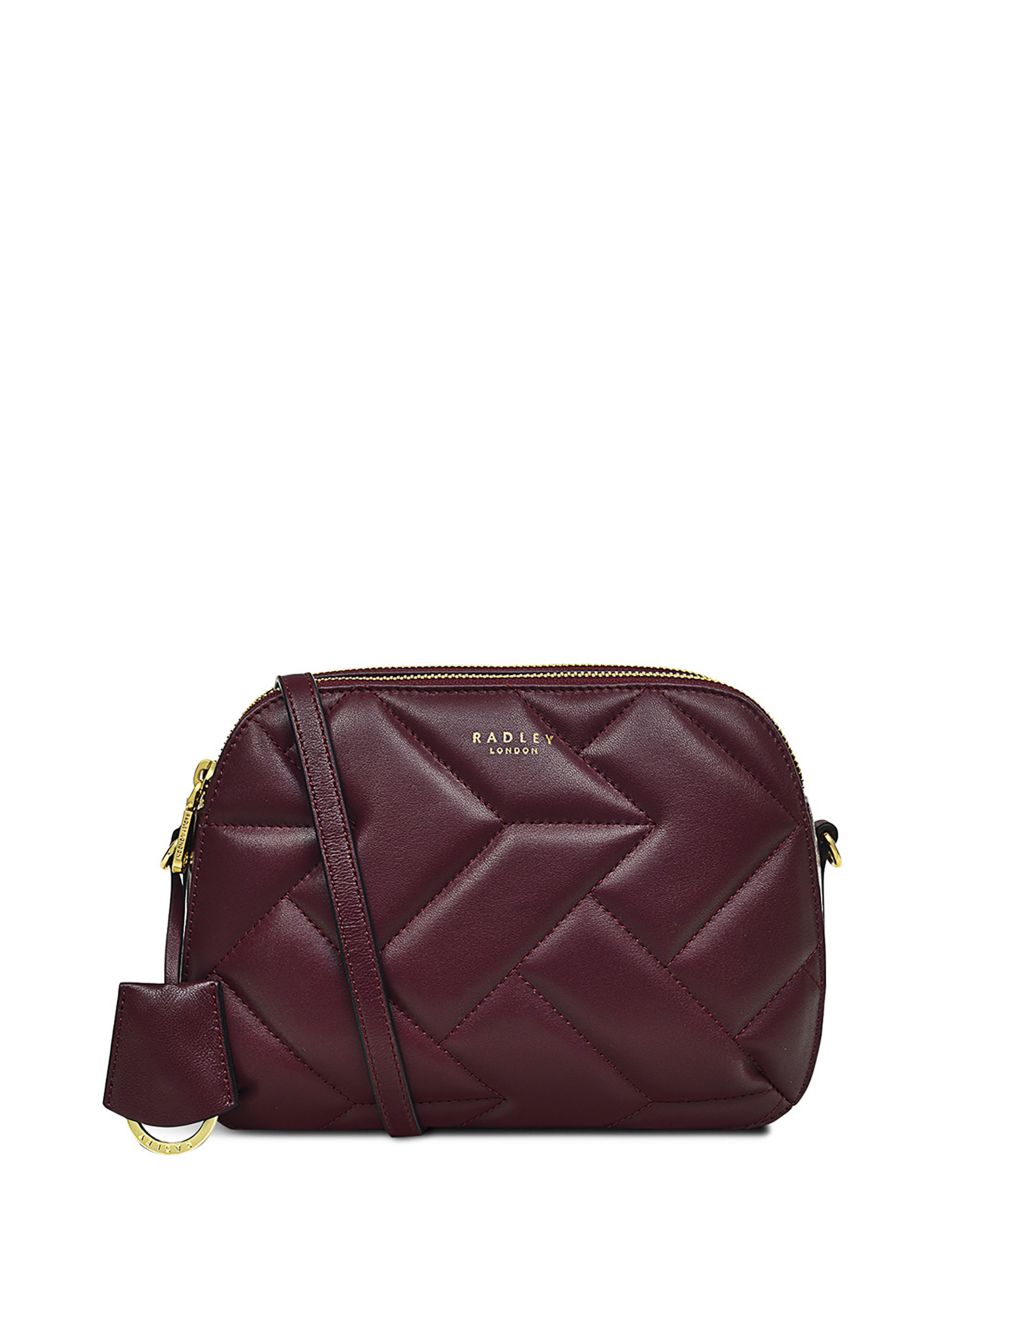 Dukes Place Leather Quilted Cross Body Bag image 4